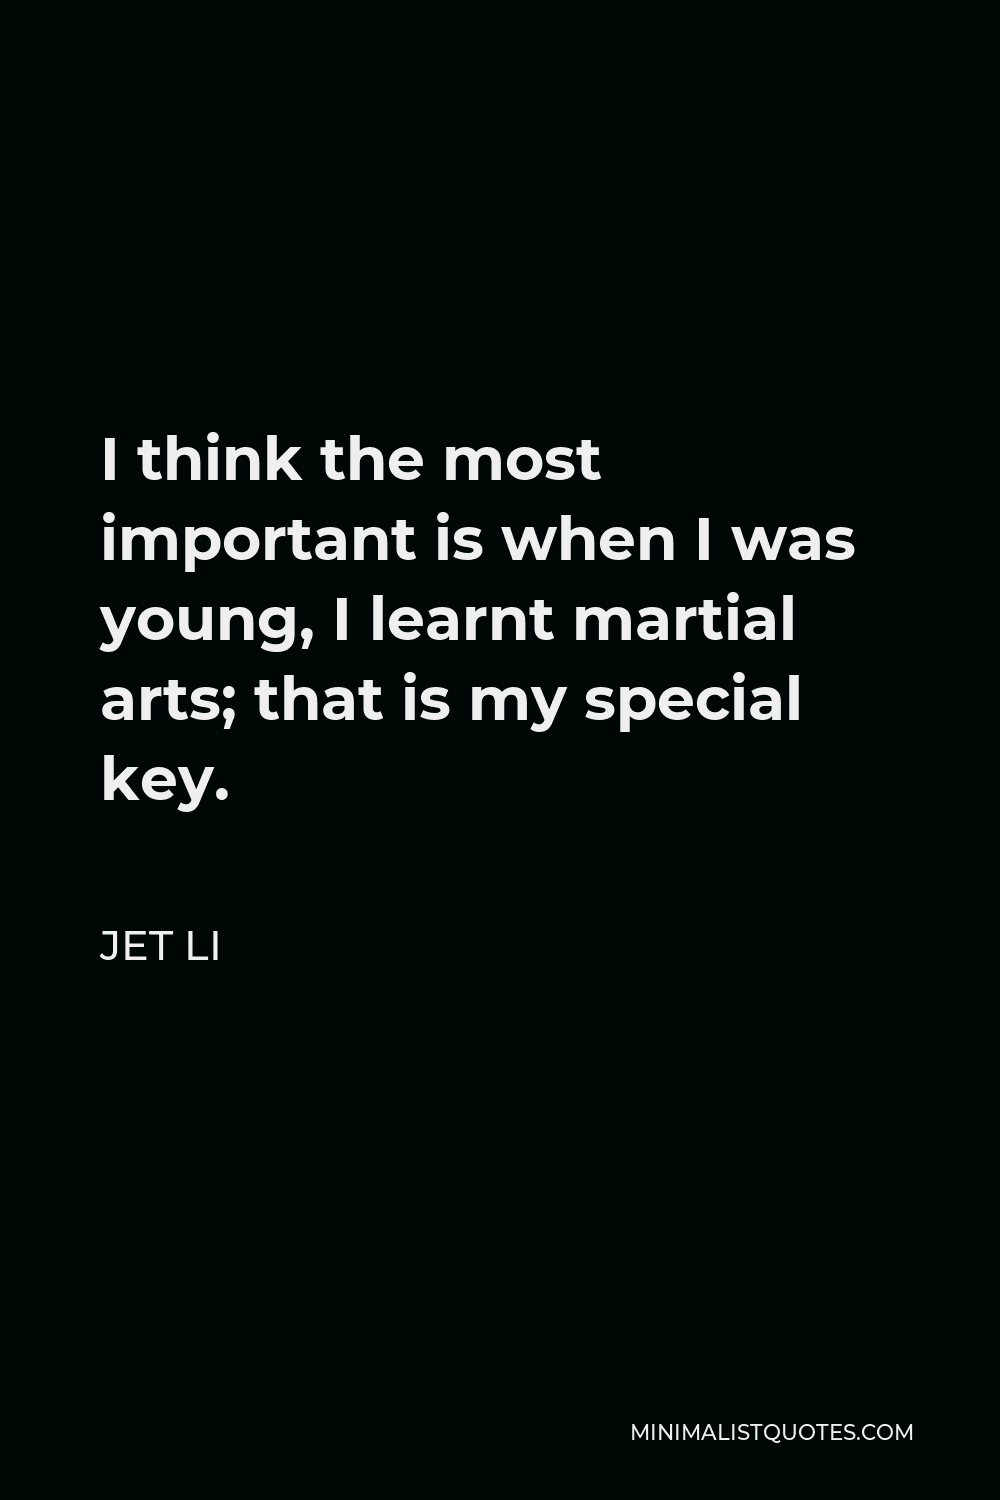 Jet Li Quote - I think the most important is when I was young, I learnt martial arts; that is my special key.